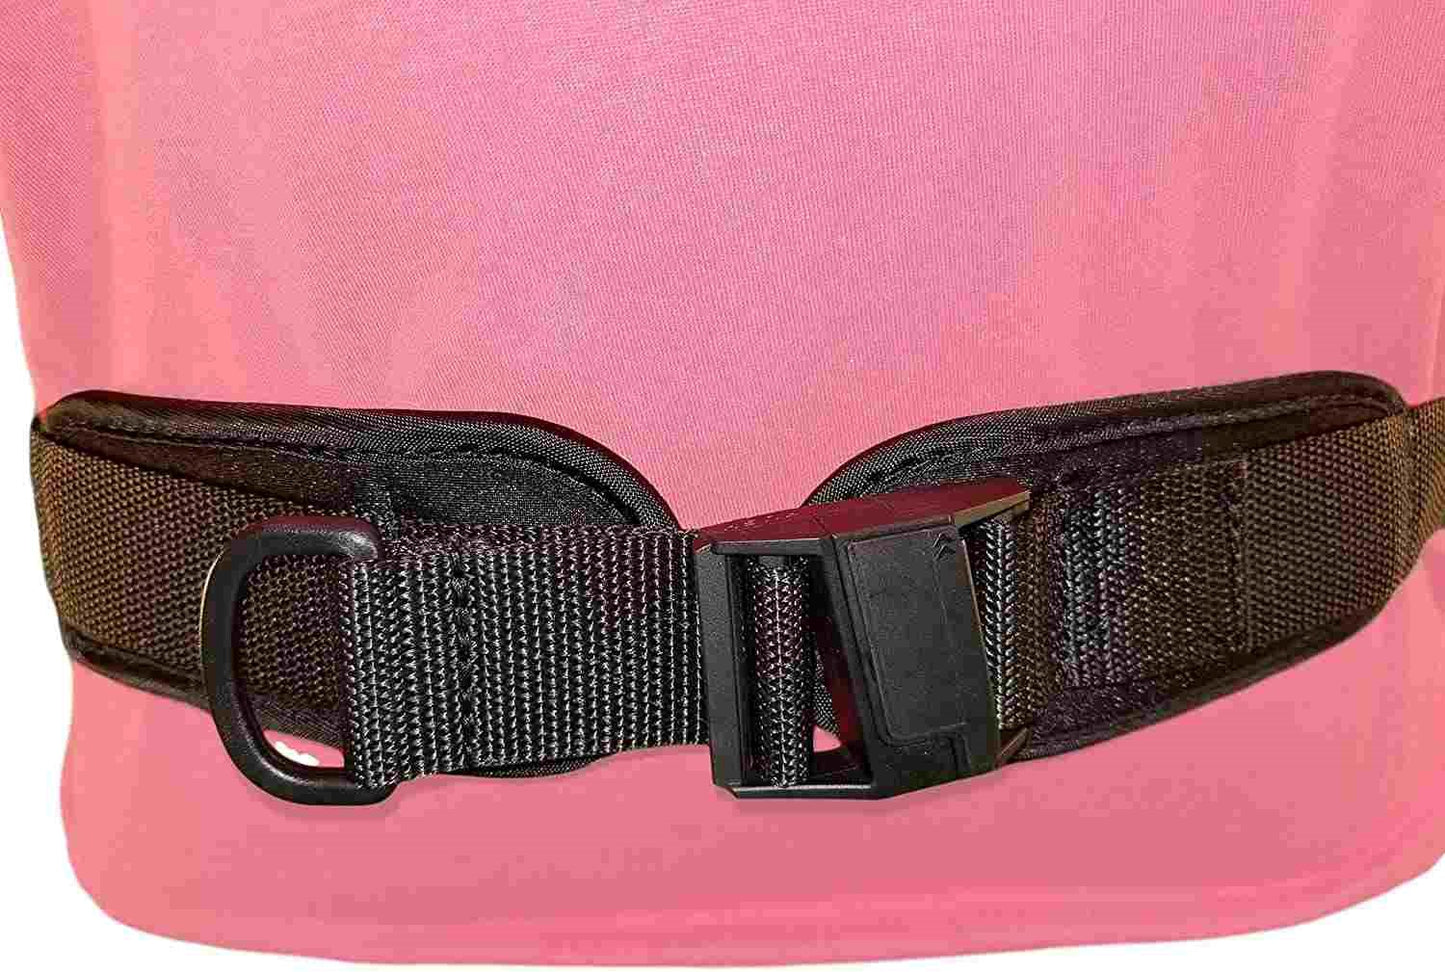 Limit-Less Wheelchair Single Pull Seat Belt with Limit-Less 1.5" Sliding Magnetic Self Engaging Buckle